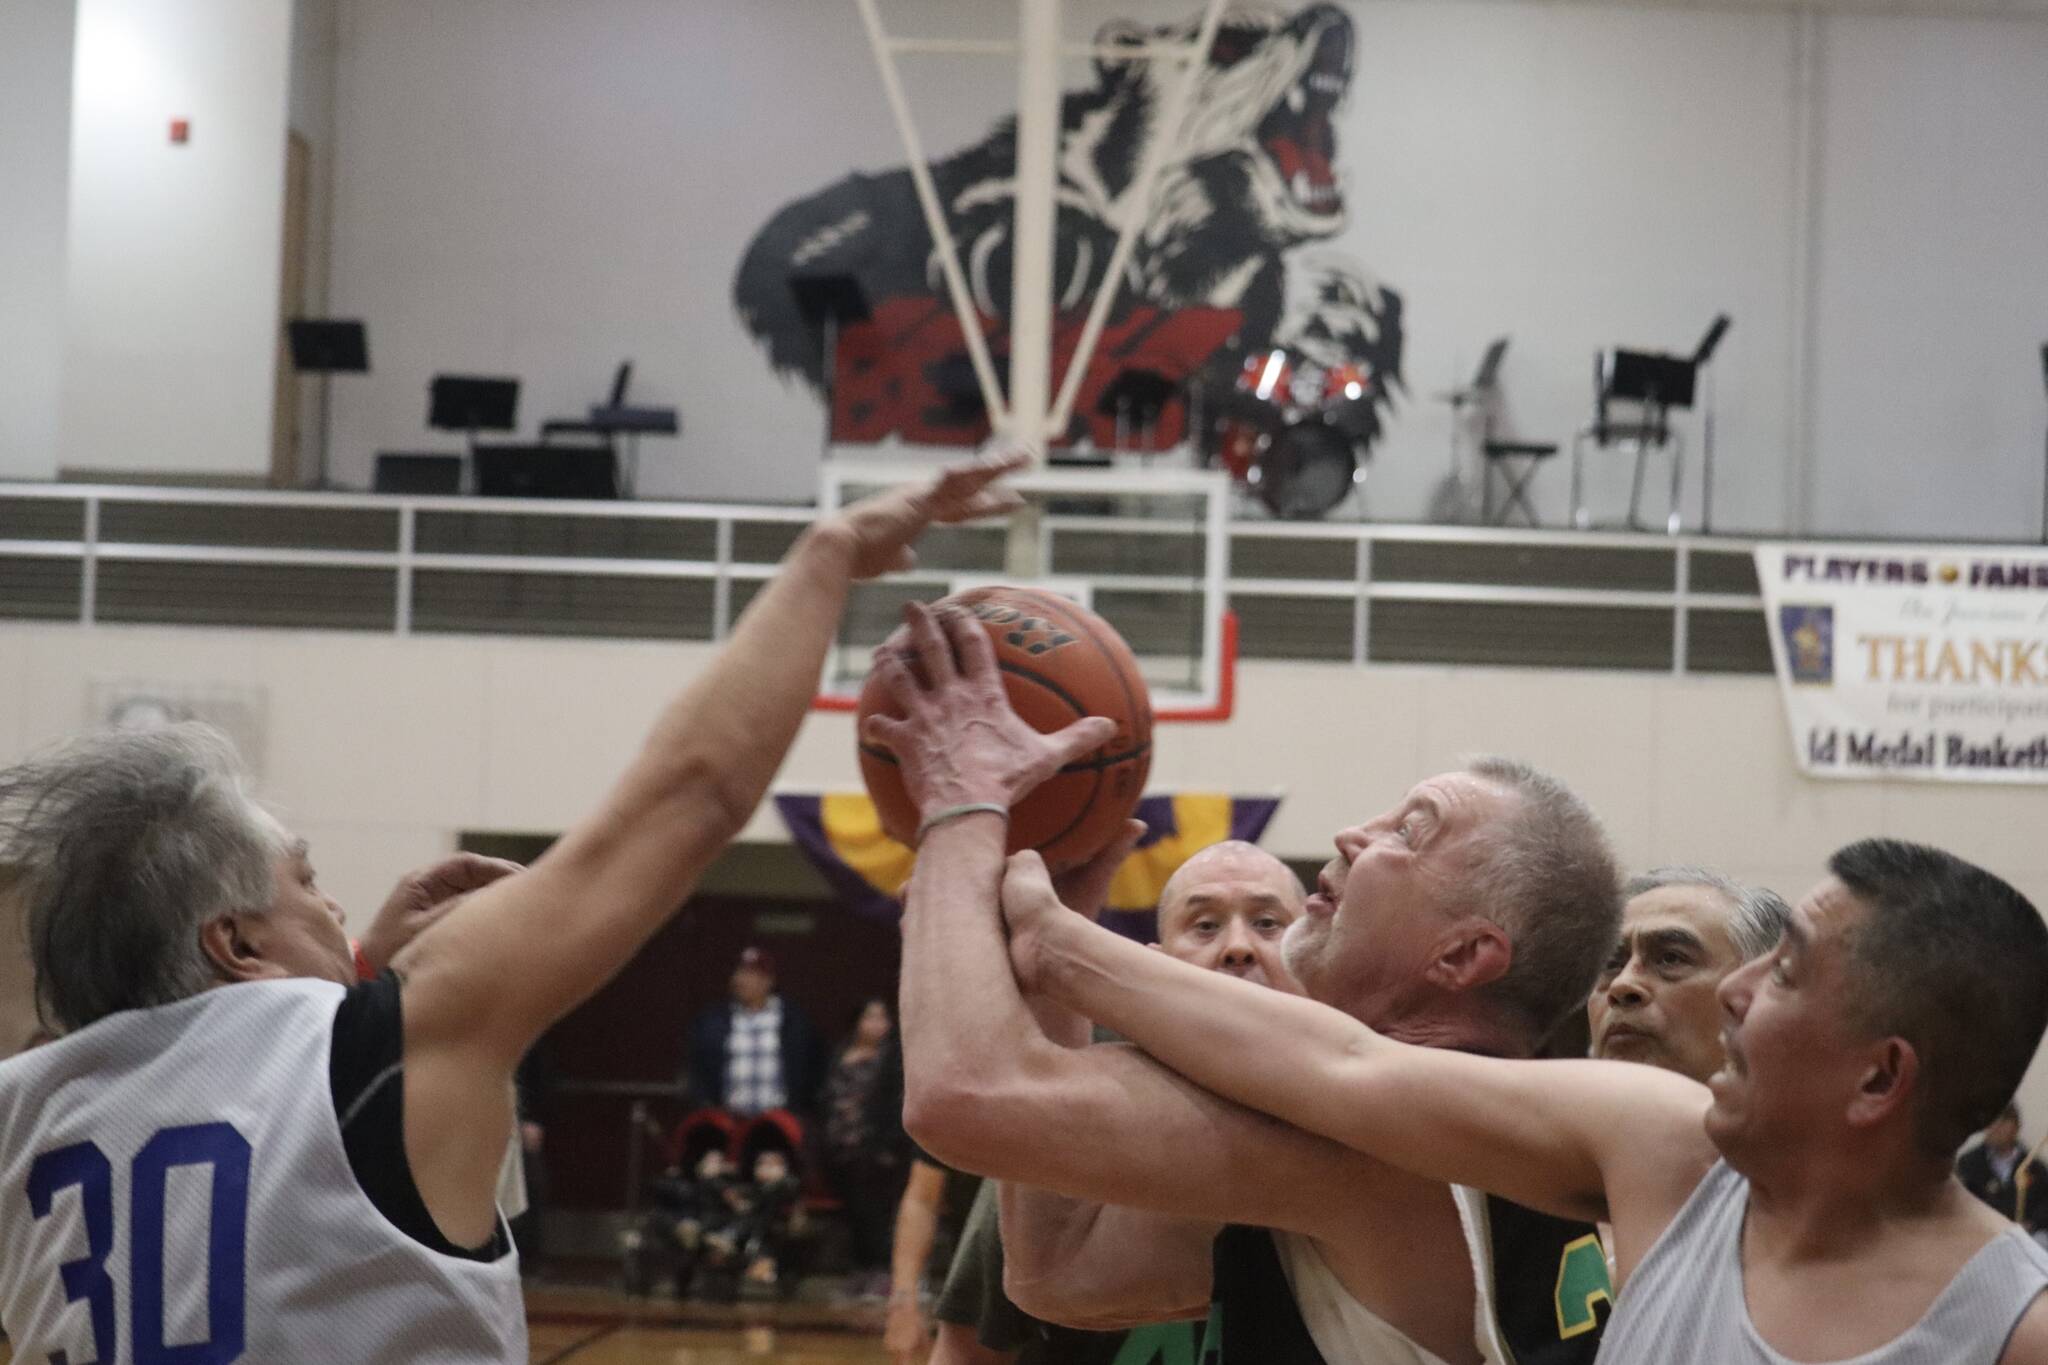 Sitka’s Norm Staton (32) fights for the rebound against Kake on Wednesday during an elimination game for the M Bracket in this year’s Gold Medal basketball tournament. Staton finished the game with 6 points. (Jonson Kuhn / Juneau Empire)